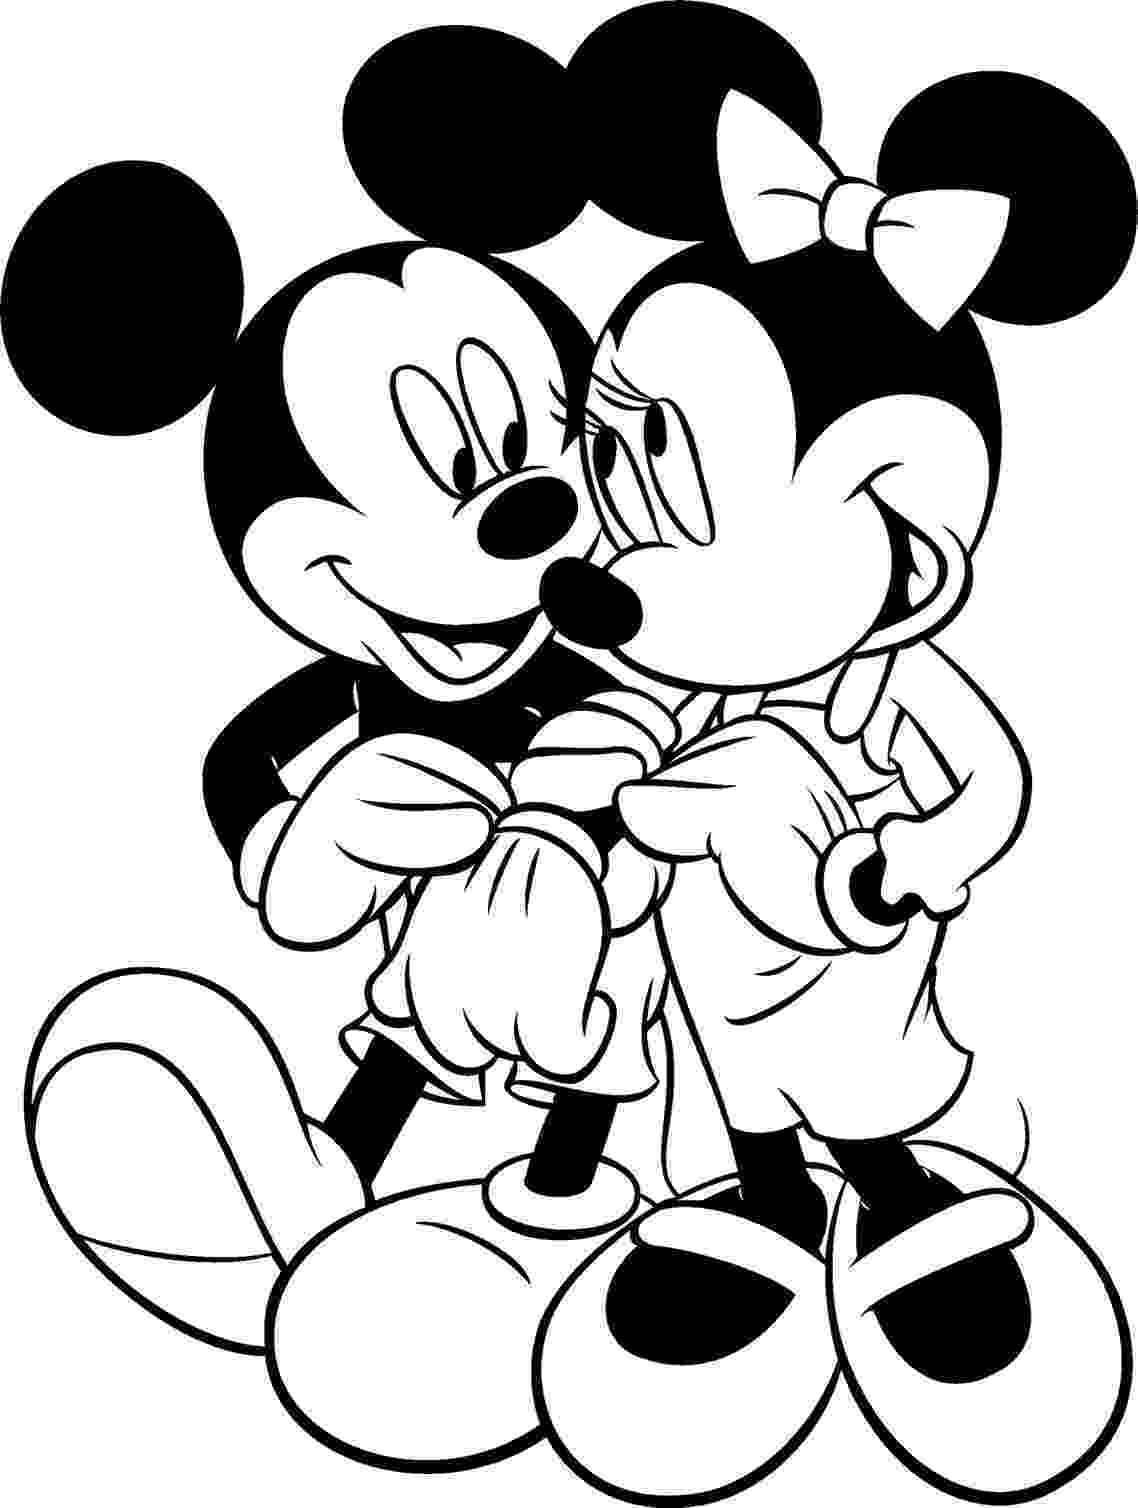 mickey mouse coloring pages mickey mouse coloring page free printable coloring pages coloring pages mickey mouse 